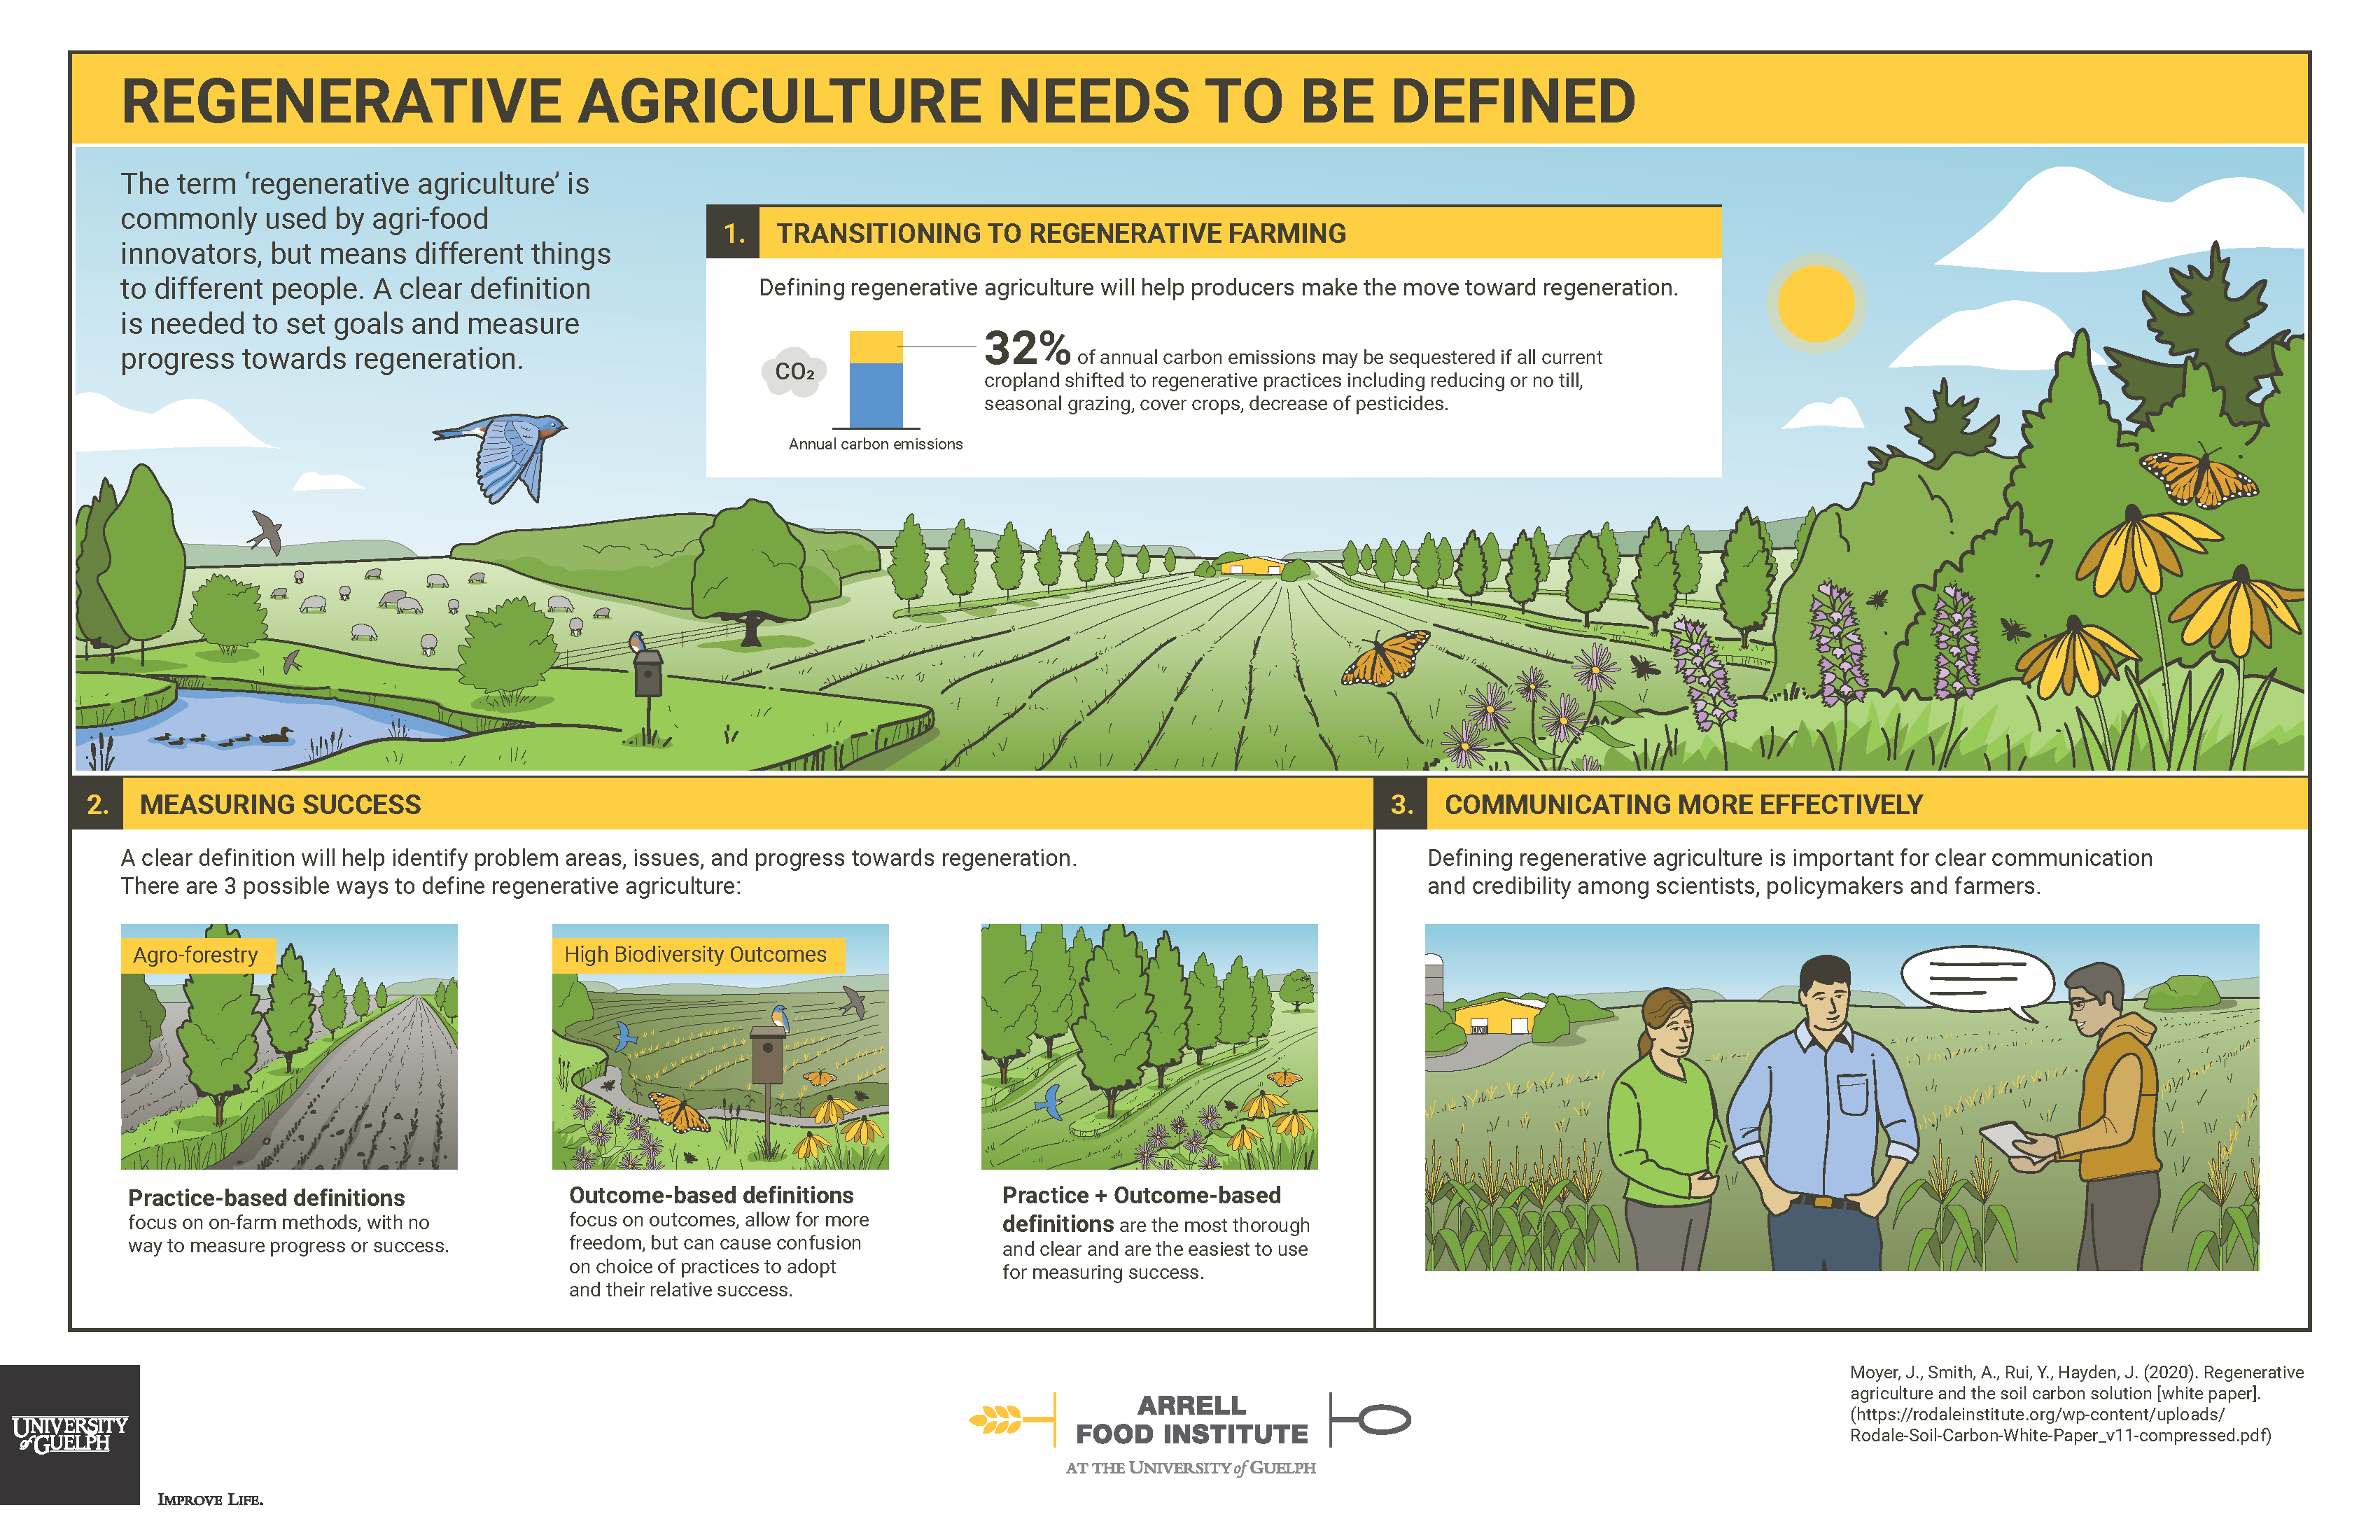 Infographic titled "REGENERATIVE AGIRCULTURE NEEDS TO BE DEFINED" and concluding that "The term 'regenerative agriculture' is commonly used by agri-food innovators, but means different things to different people. A clear definition is needed to set goals and measure progress towards regeneration."